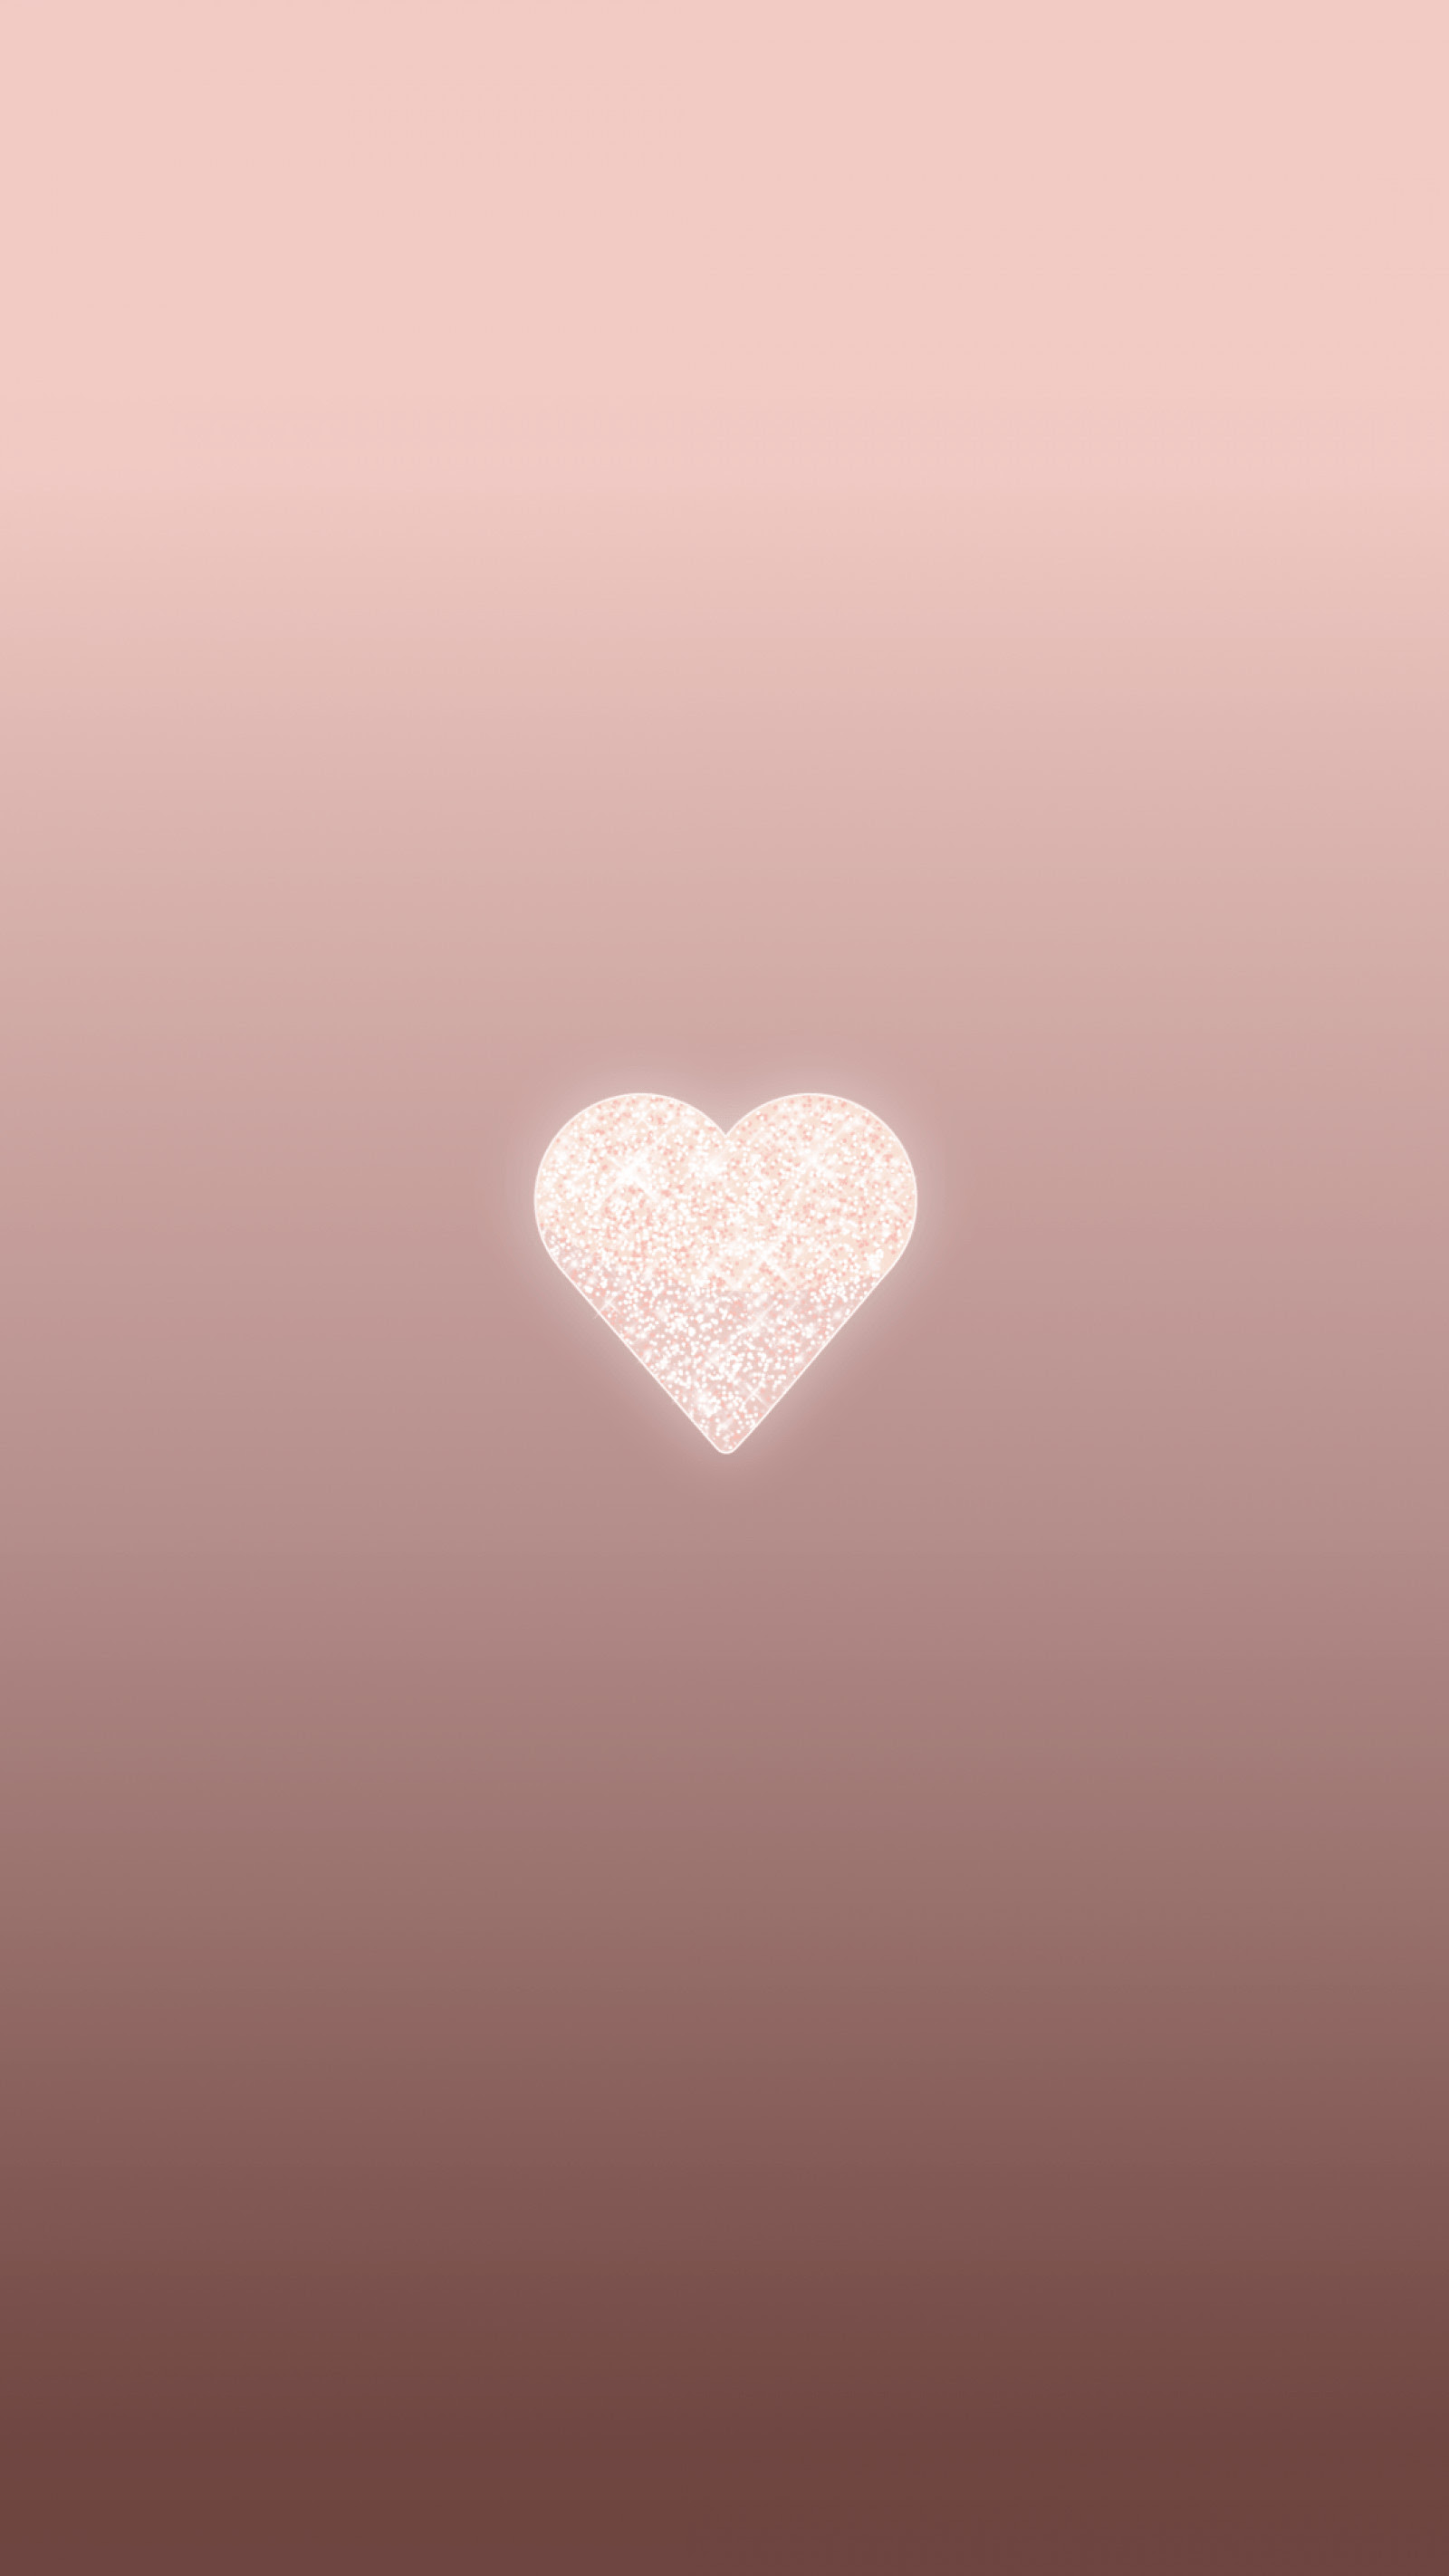 Aesthetic Cute Heart Wallpapers For Iphone - Largest Wallpaper Portal